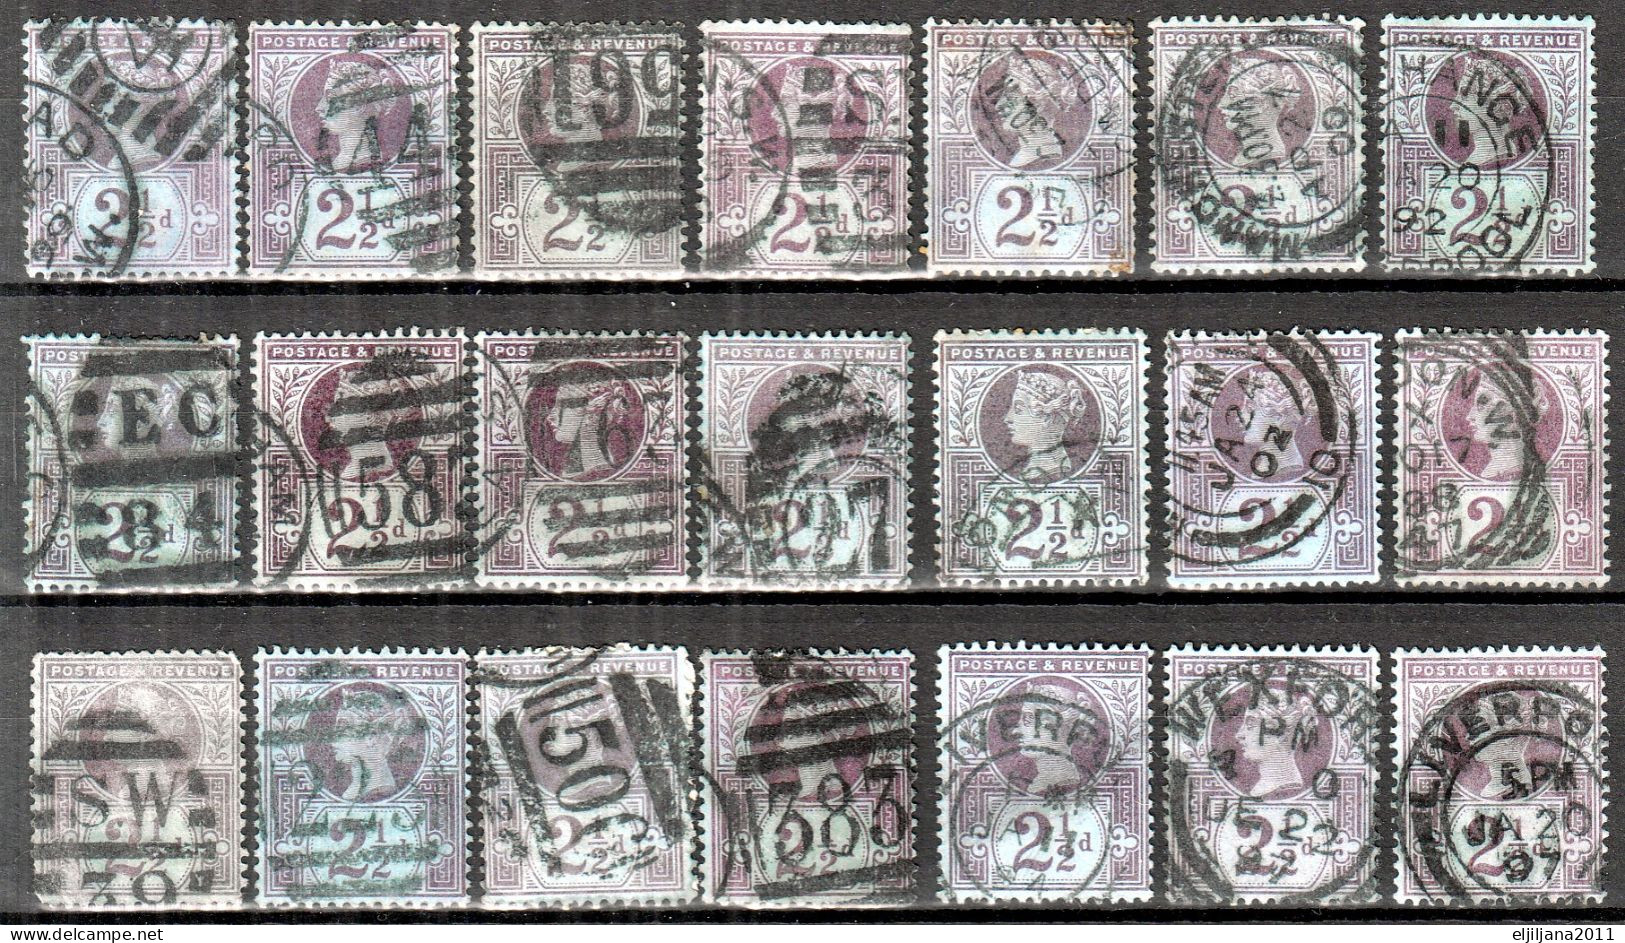 Great Britain GB / UK 1887 ⁕ QV Jubilee Issue 50th 2½d Mi.89 / SG 201 ⁕ 21v Used / Shades / Nice Postmark - Oblitérés